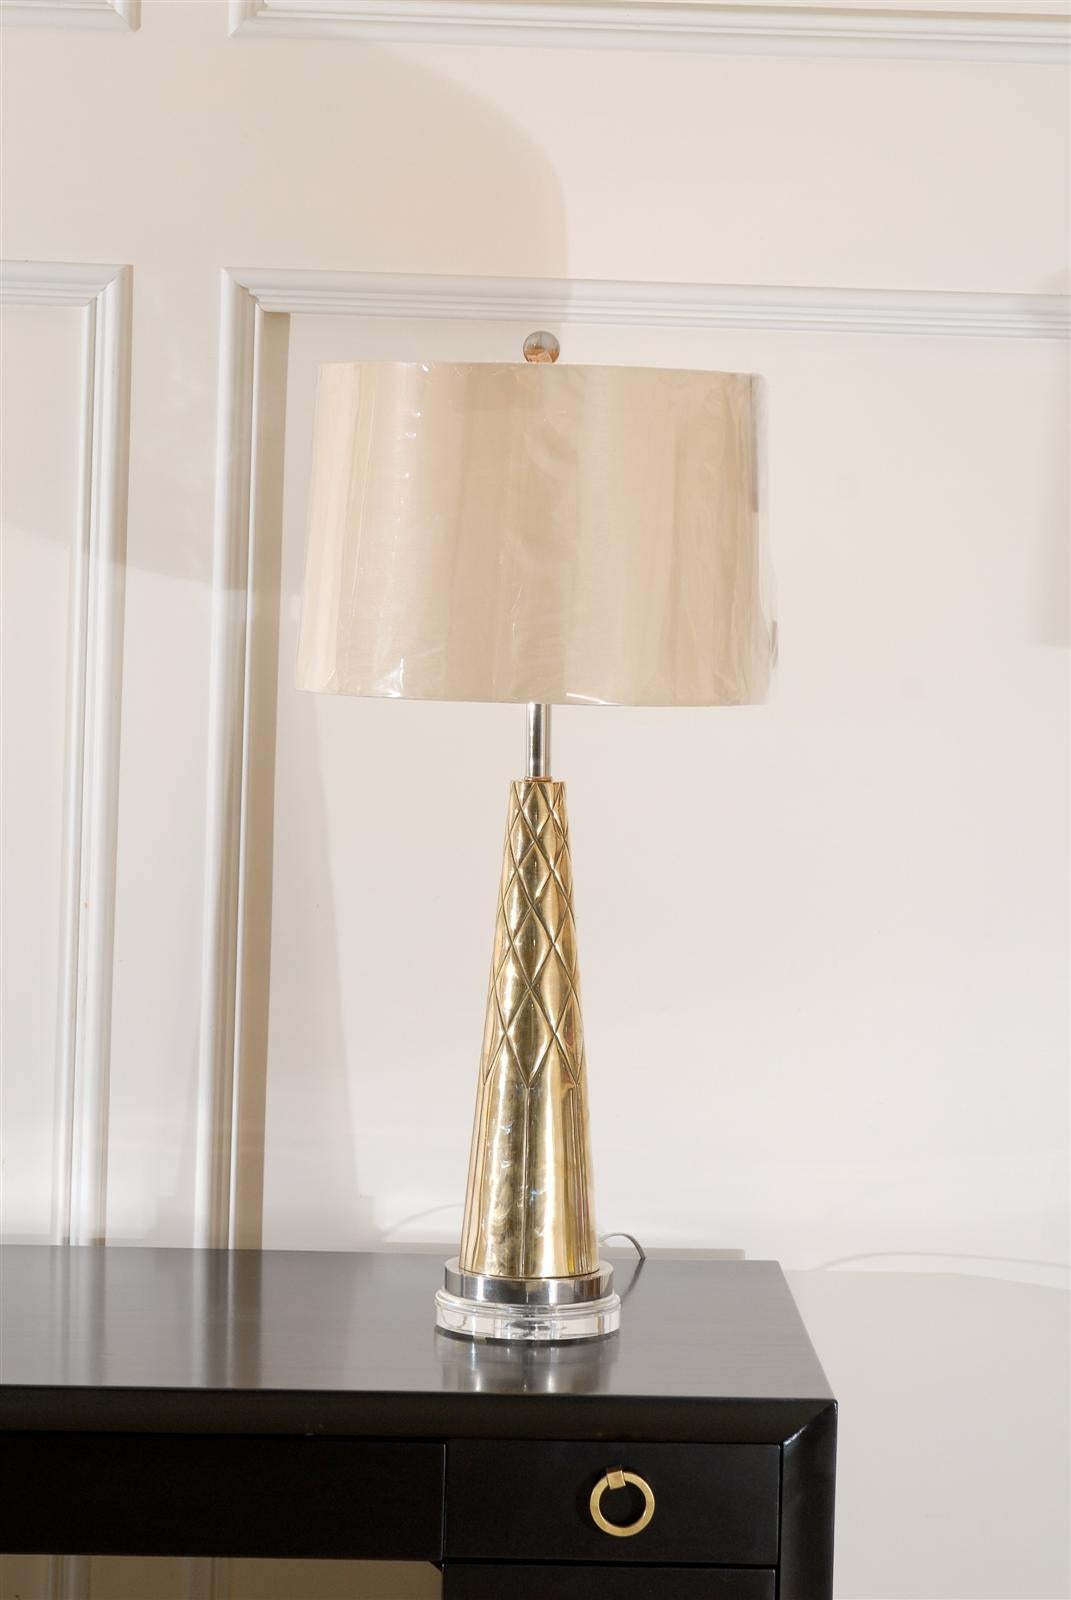 A fantastic pair of modern etched cone lamps, circa 1960. Comprised of nickel and brass-plated components, over solid bronze on a Lucite base. Heavy duty jewelry! Excellent restored condition, all components have been re-plated. Rewired with clear